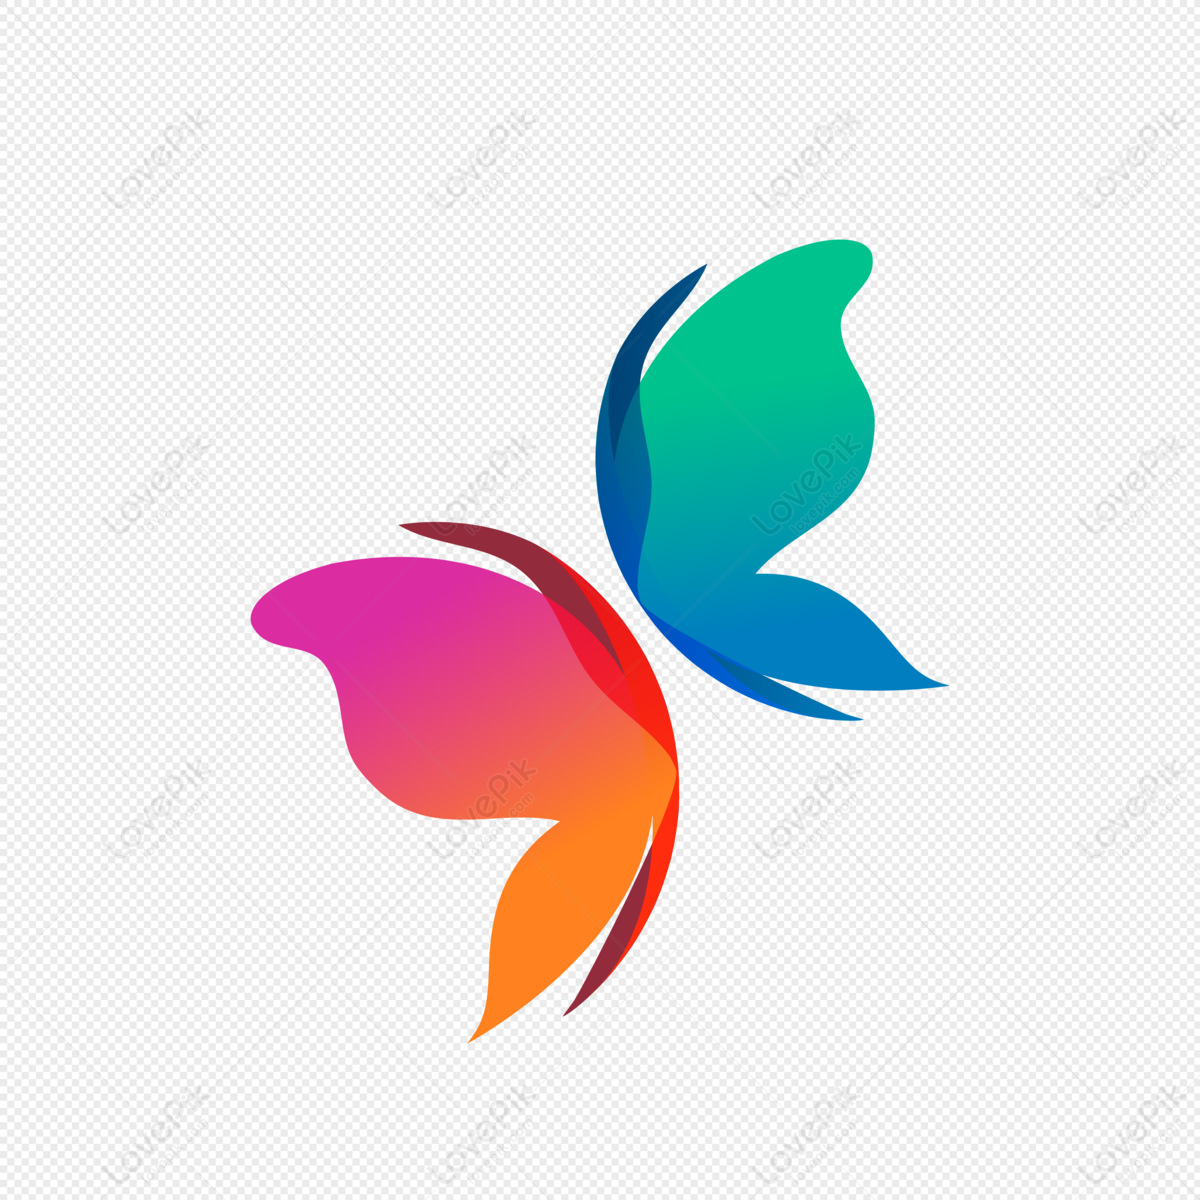 Butterfly logo, Vector Logo of Butterfly brand free download (eps, ai, png,  cdr) formats